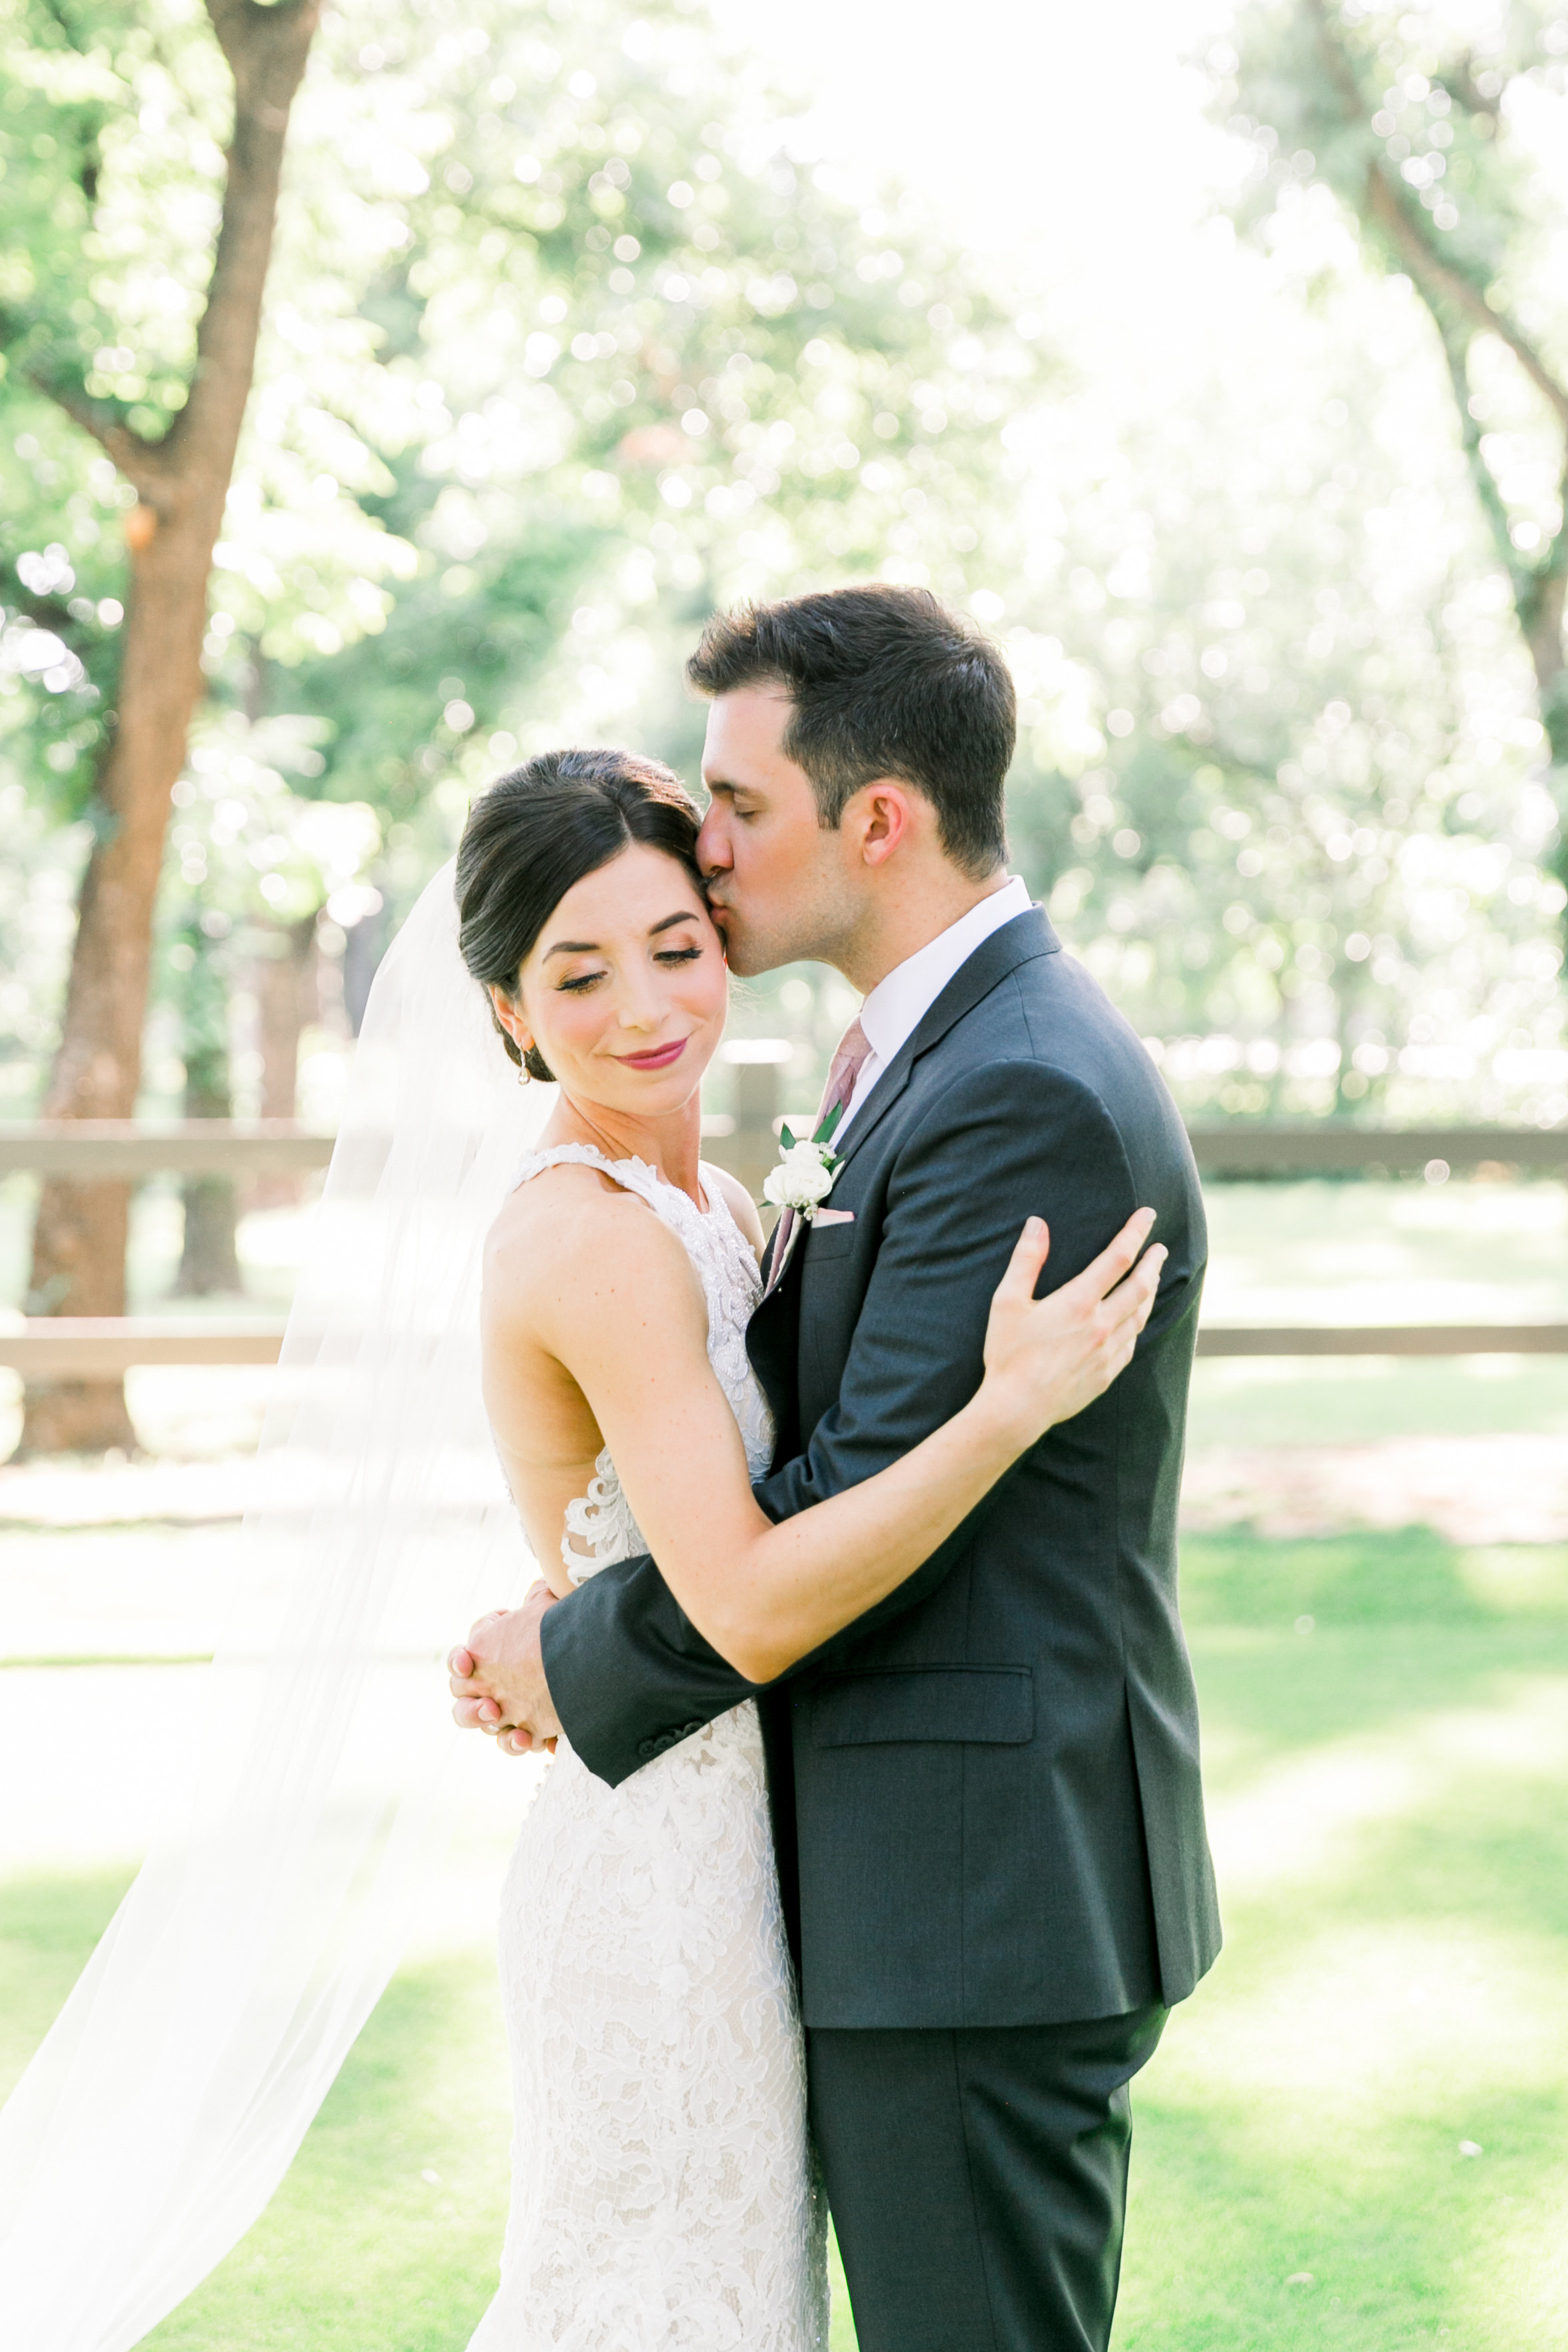 Karlie Colleen Photography - Venue At The Grove - Arizona Wedding - Maggie & Grant -58